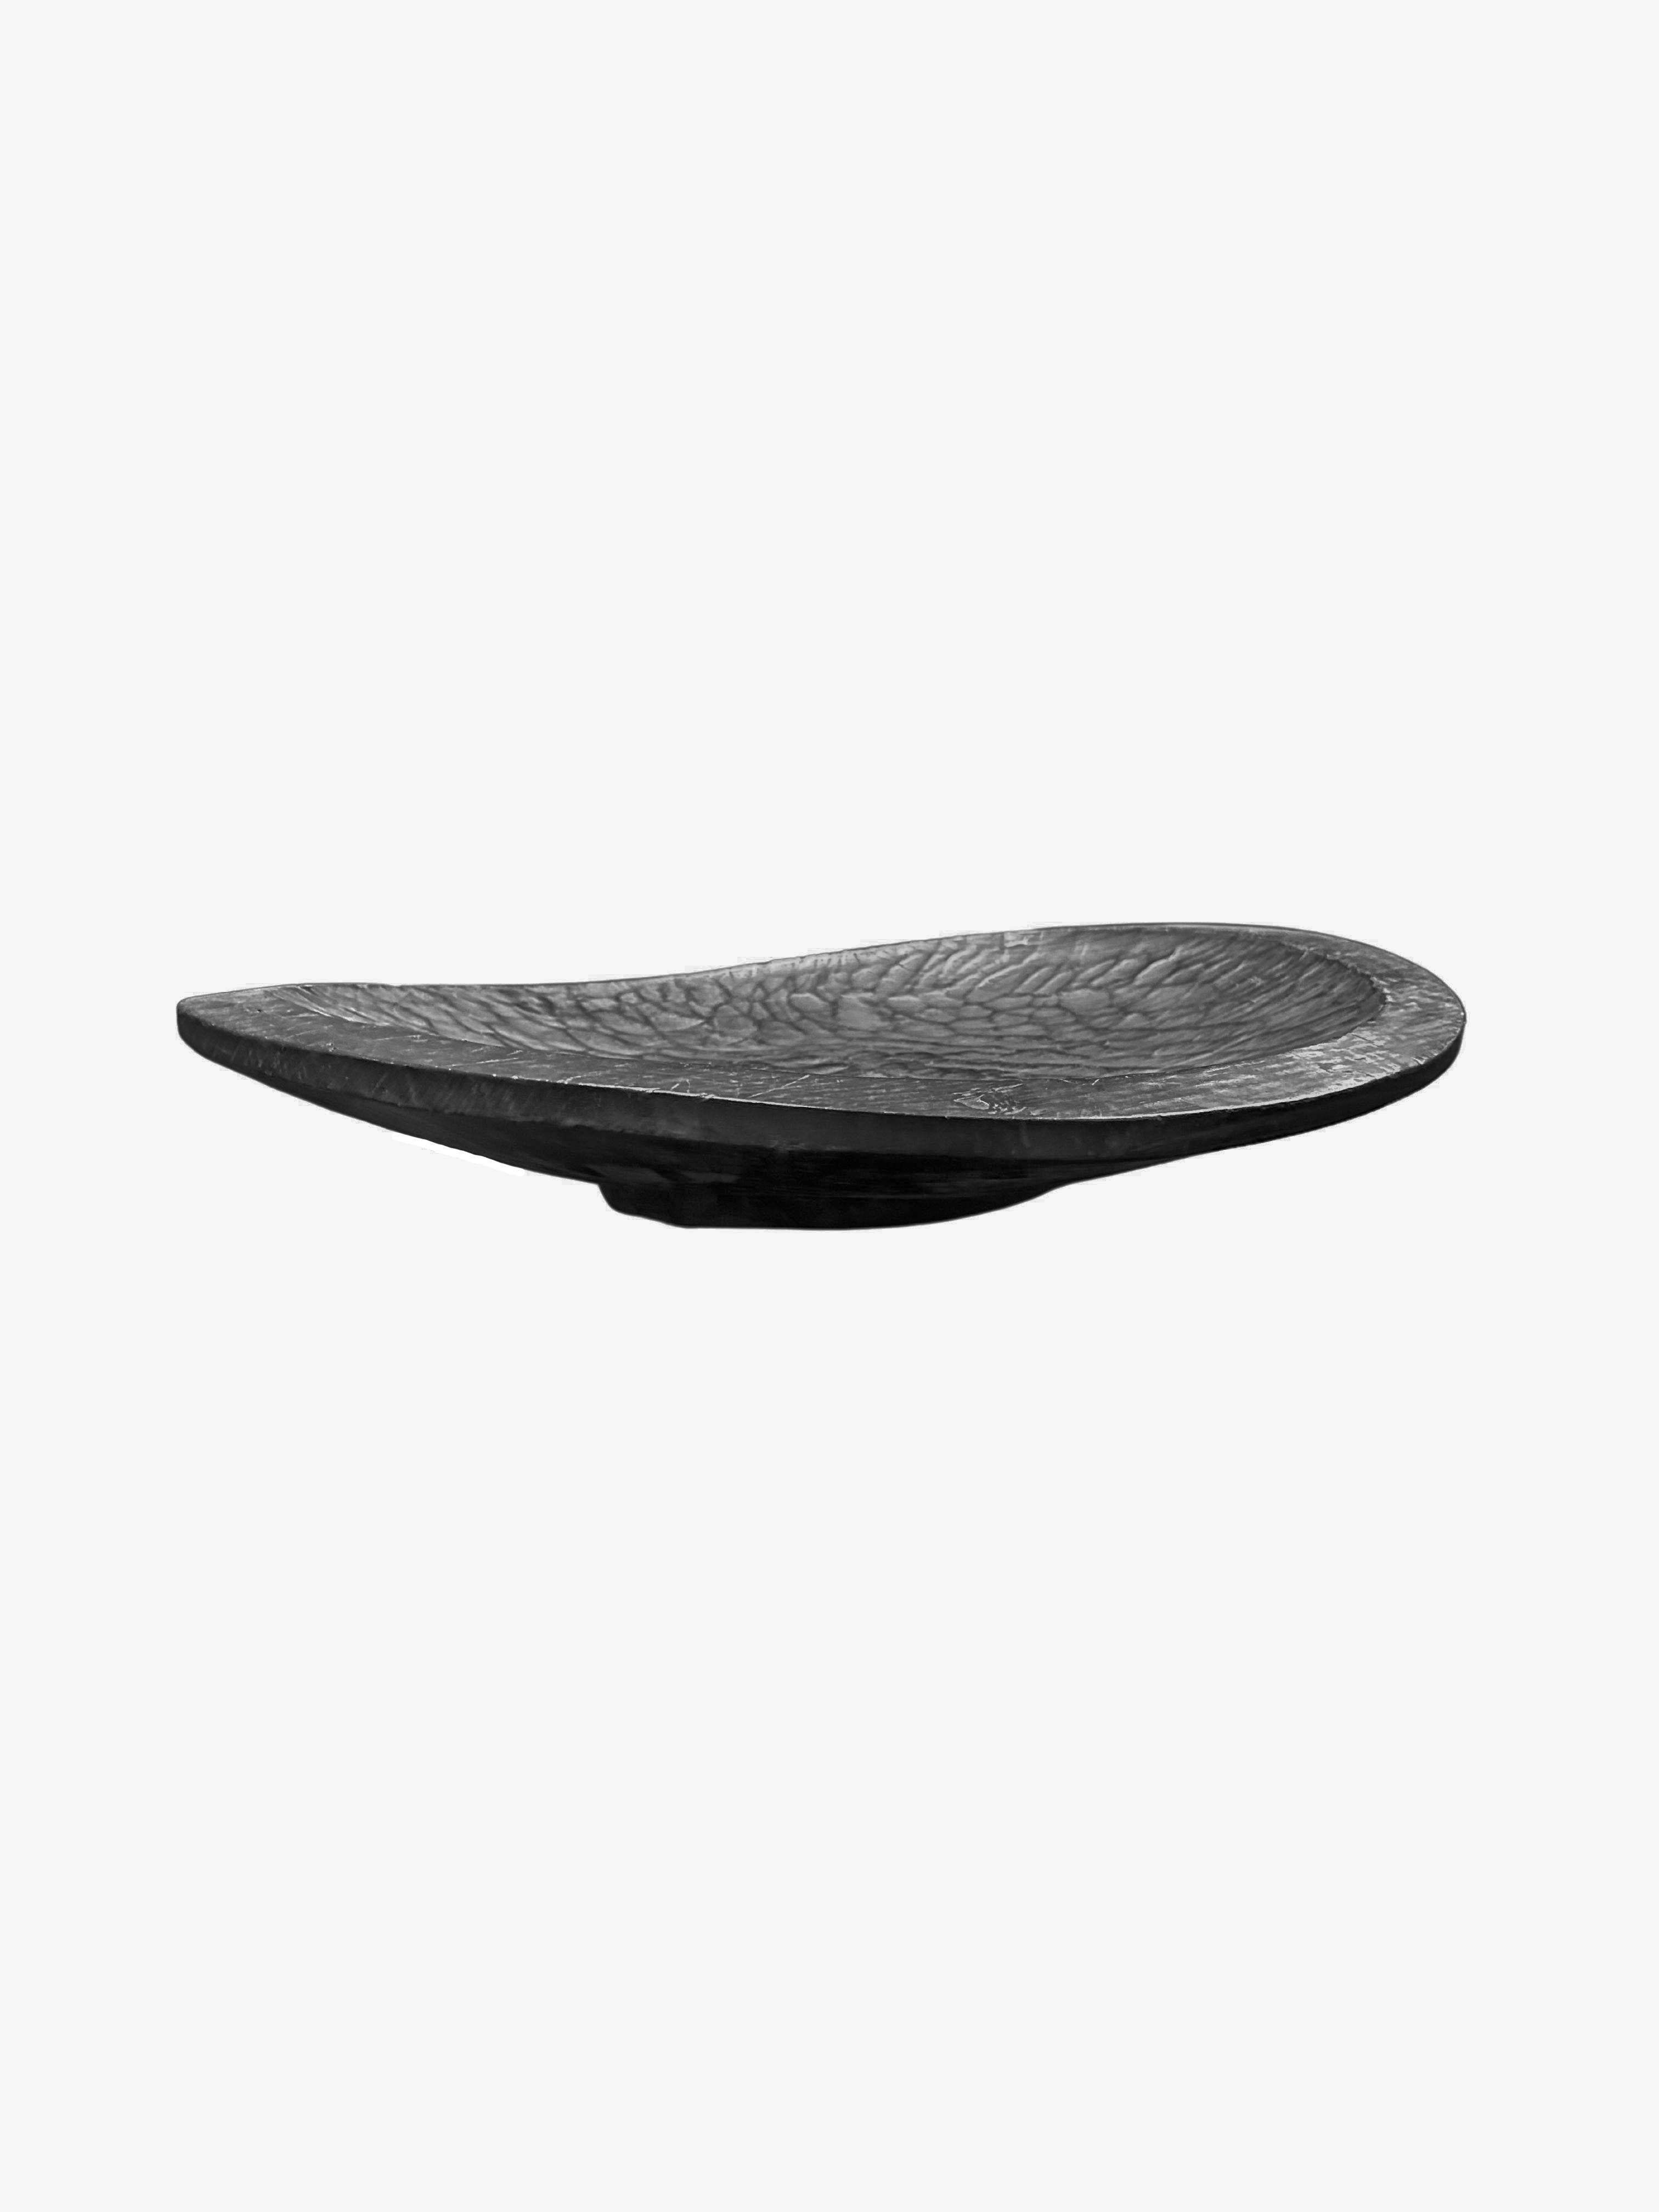 A hand-crafted mango wood bowl with hand-hewn detailing along the basin. The bowl was cut from a much larger slab of mango wood and features wonderful mix of wood textures. To achieve the rich black colour the bowl was burnt three times and finished